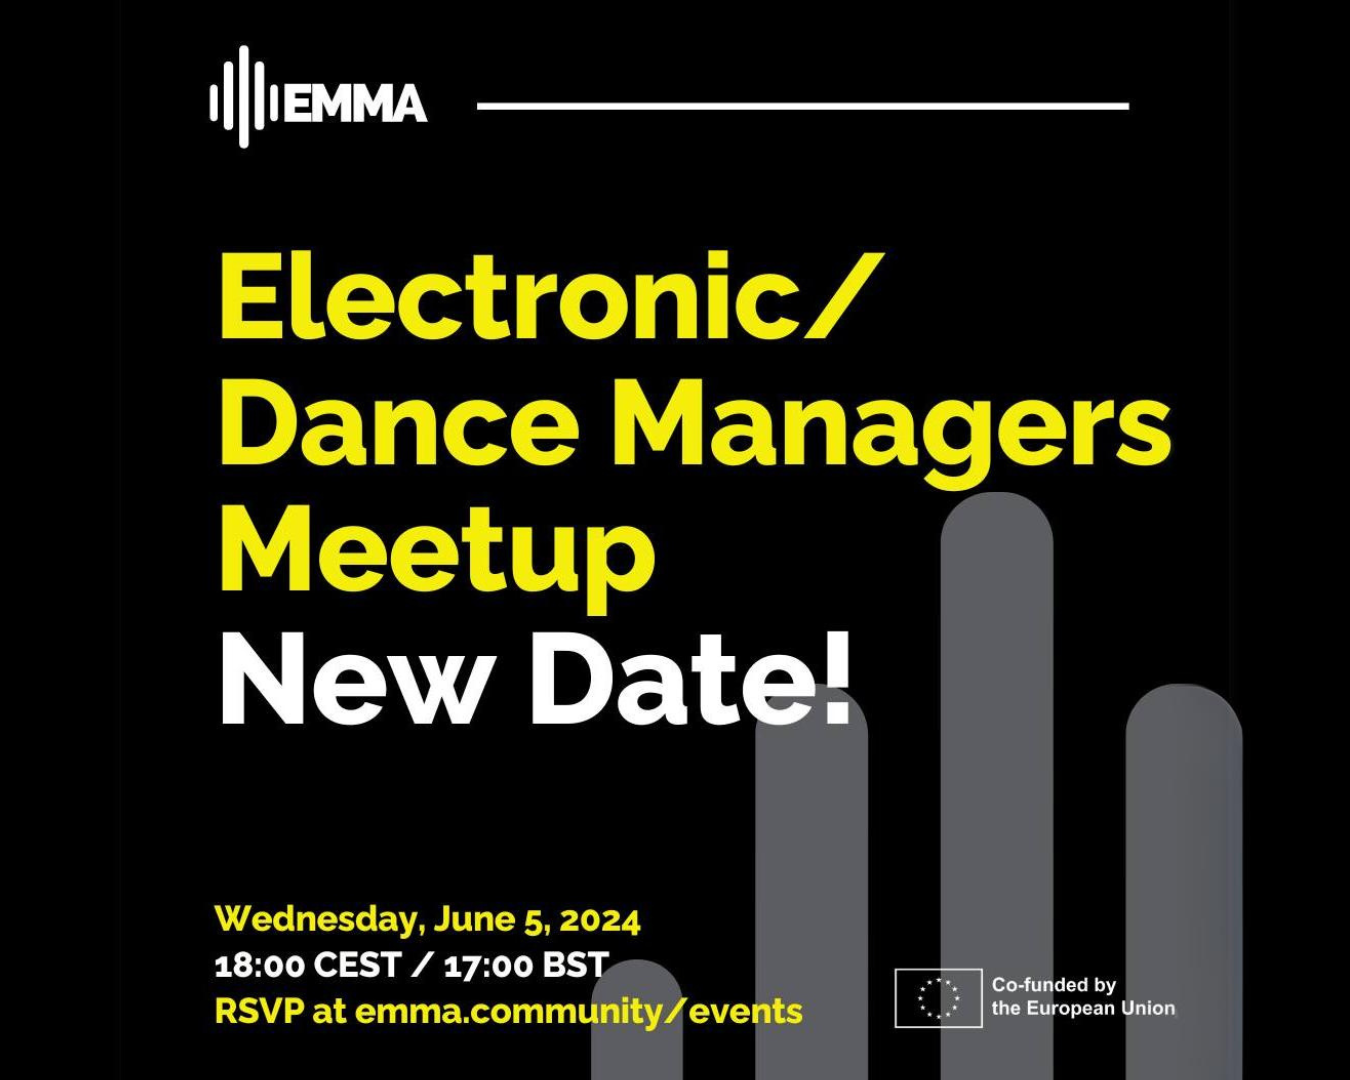 EMMA Electronic/Dance Managers Meetup